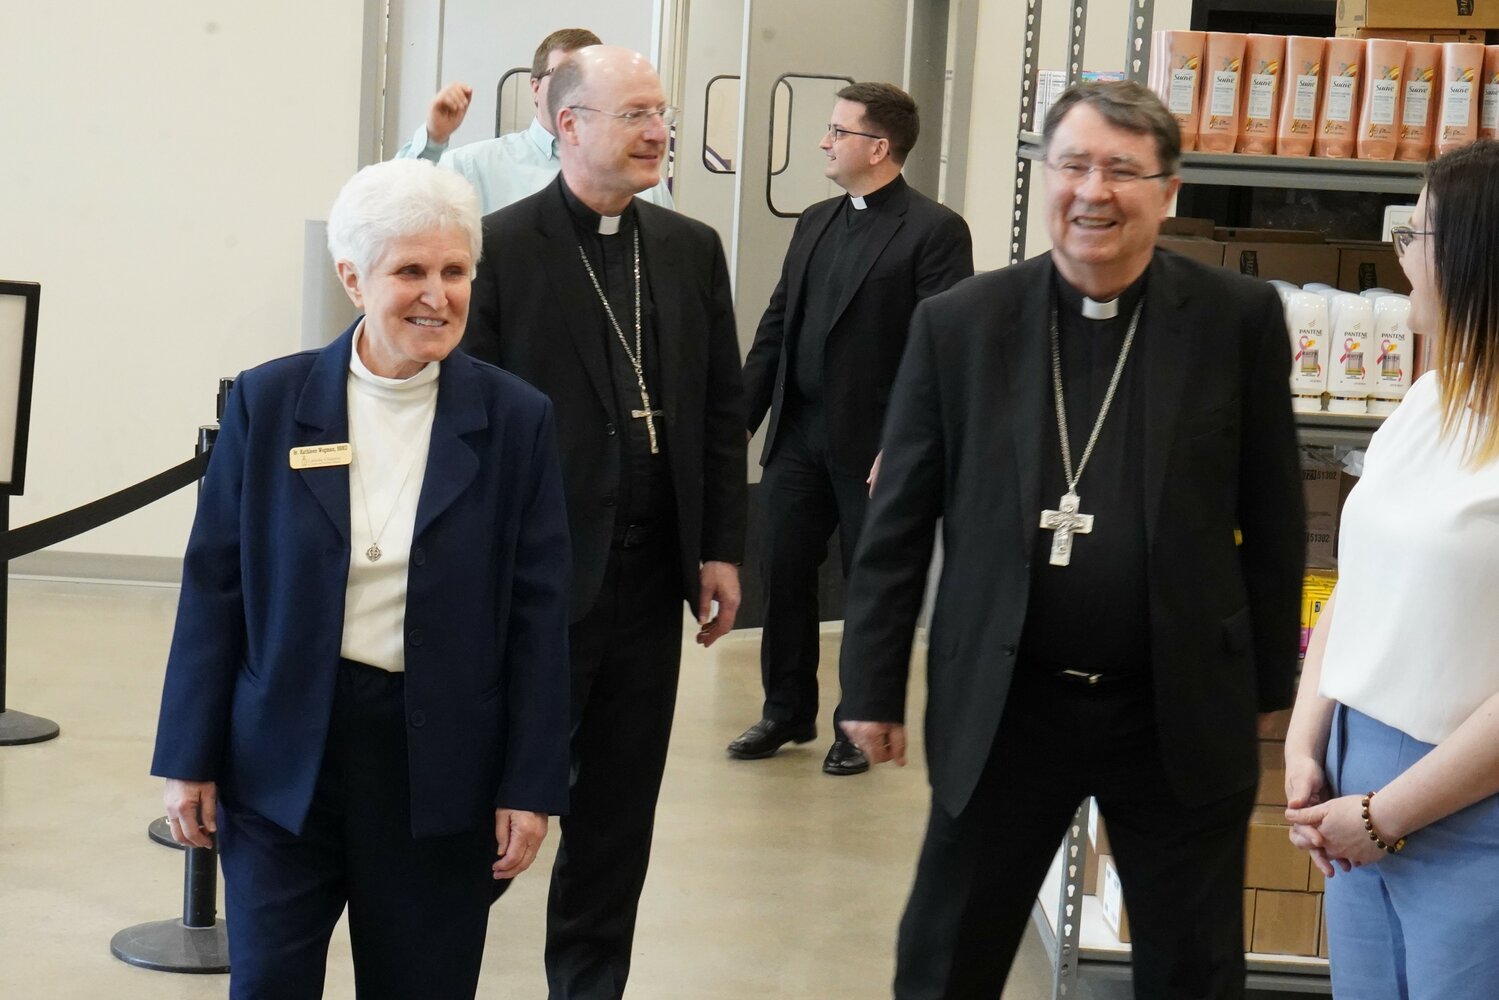 Archbishop Christophe Pierre, right, apostolic nuncio to the United States, tours Catholic Charities of Central and Northern Missouri’s (CCCNMO’s)Client Choice Food Pantry in Jefferson City on May 4, with Sister Kathleen Wegman SSND, CCCNMO interim executive director, and Bishop W. Shawn McKnight. Six weeks later, Archbishop Pierre mentioned what he saw in an address to the U.S. Catholic bishops.